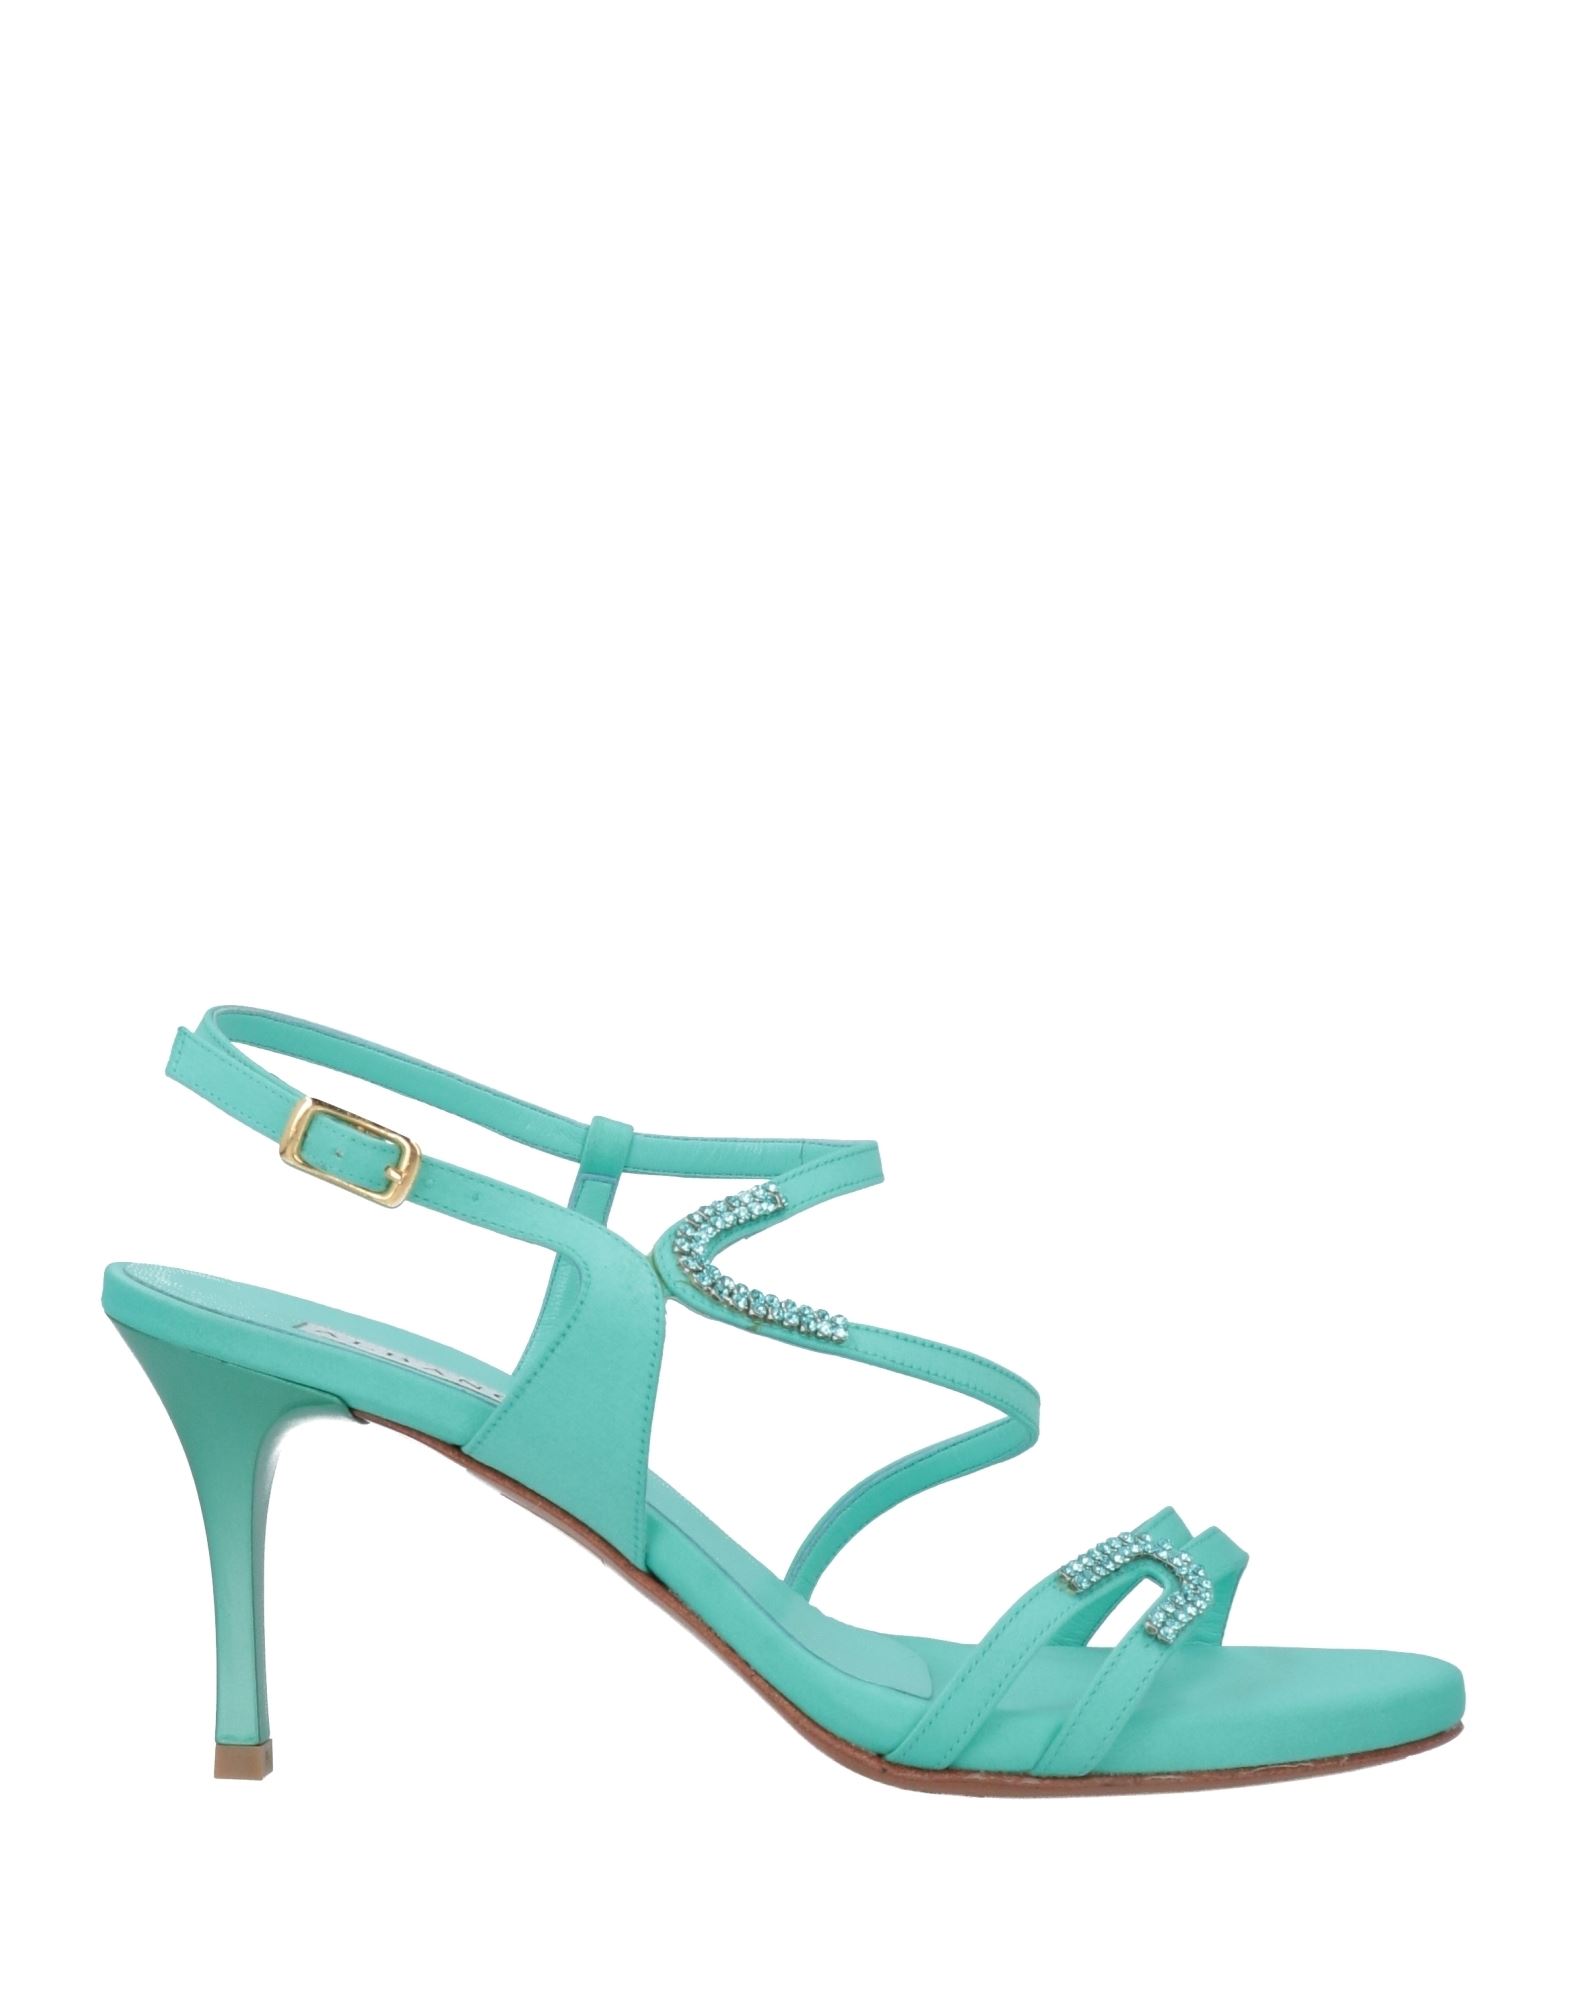 Albano Sandals In Turquoise